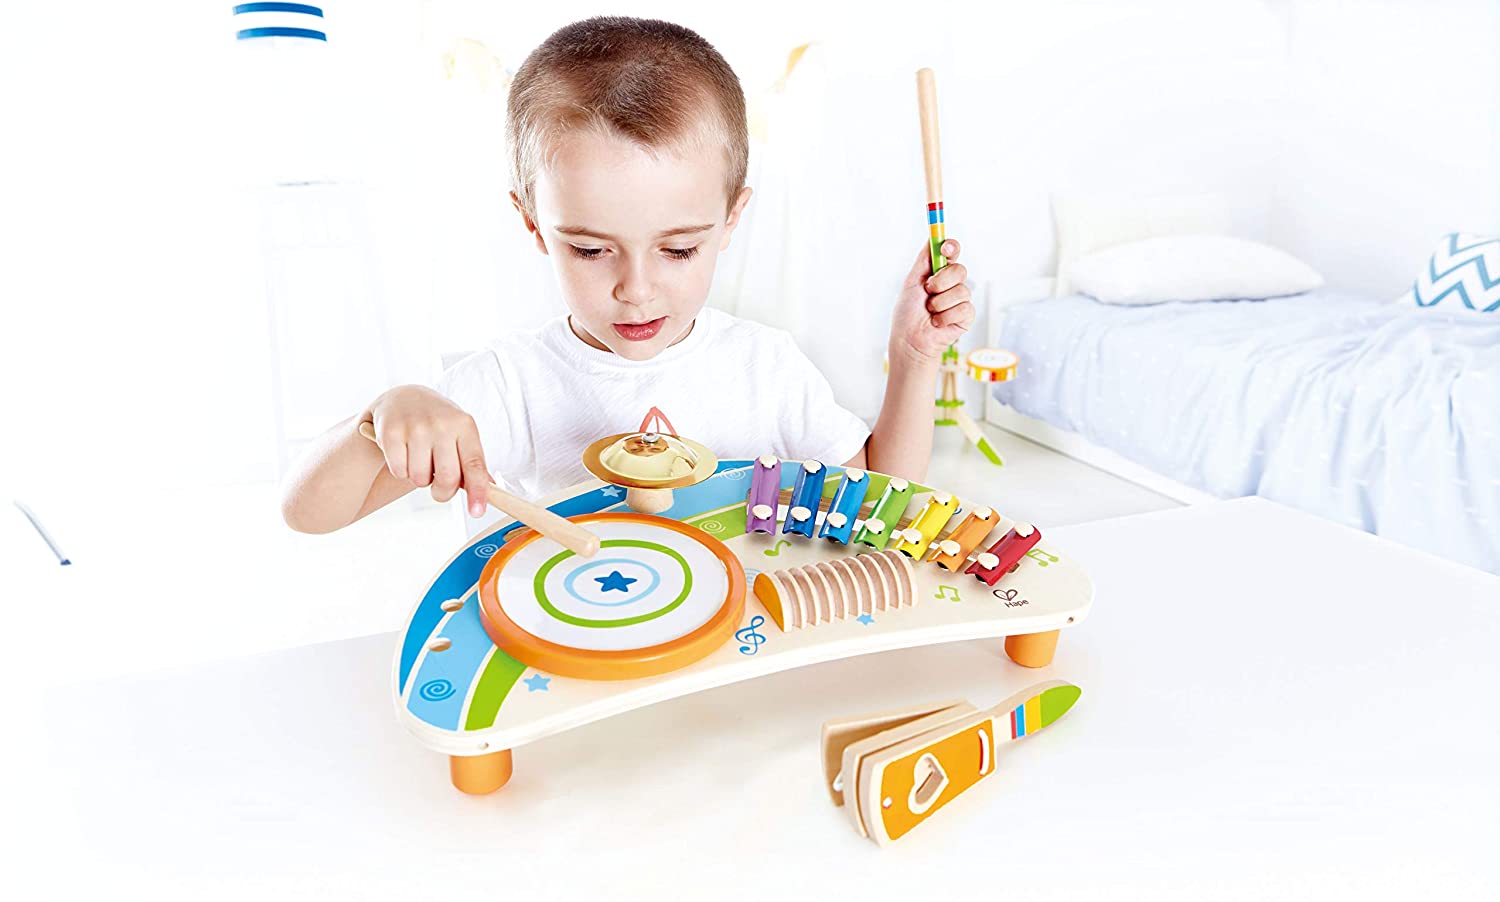 HAPE Early Mighty Band Melodies - ANB Baby -$20 - $50